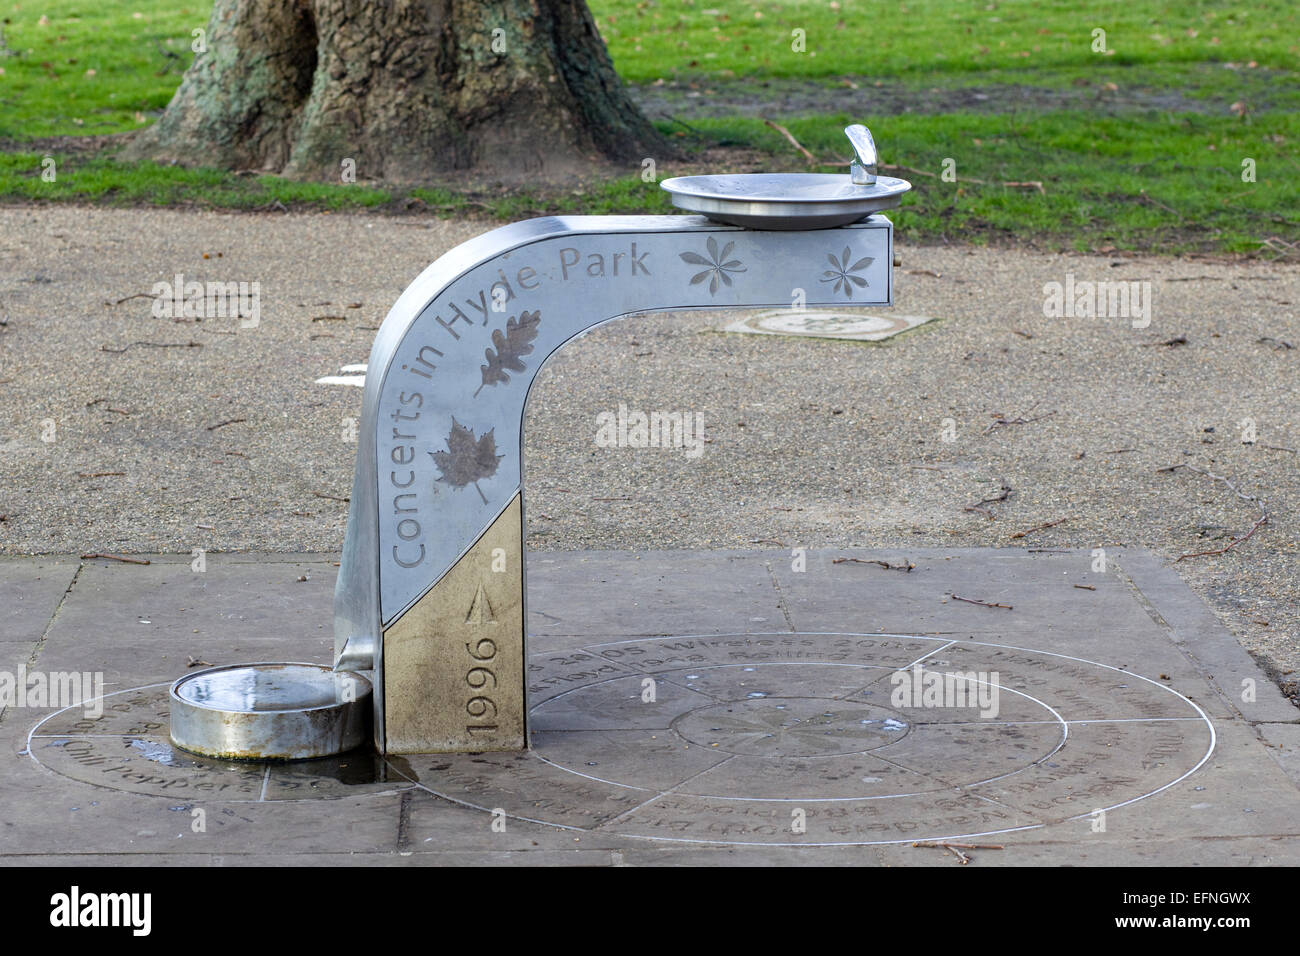 drinking-water-fountain-with-dog-bowl-at